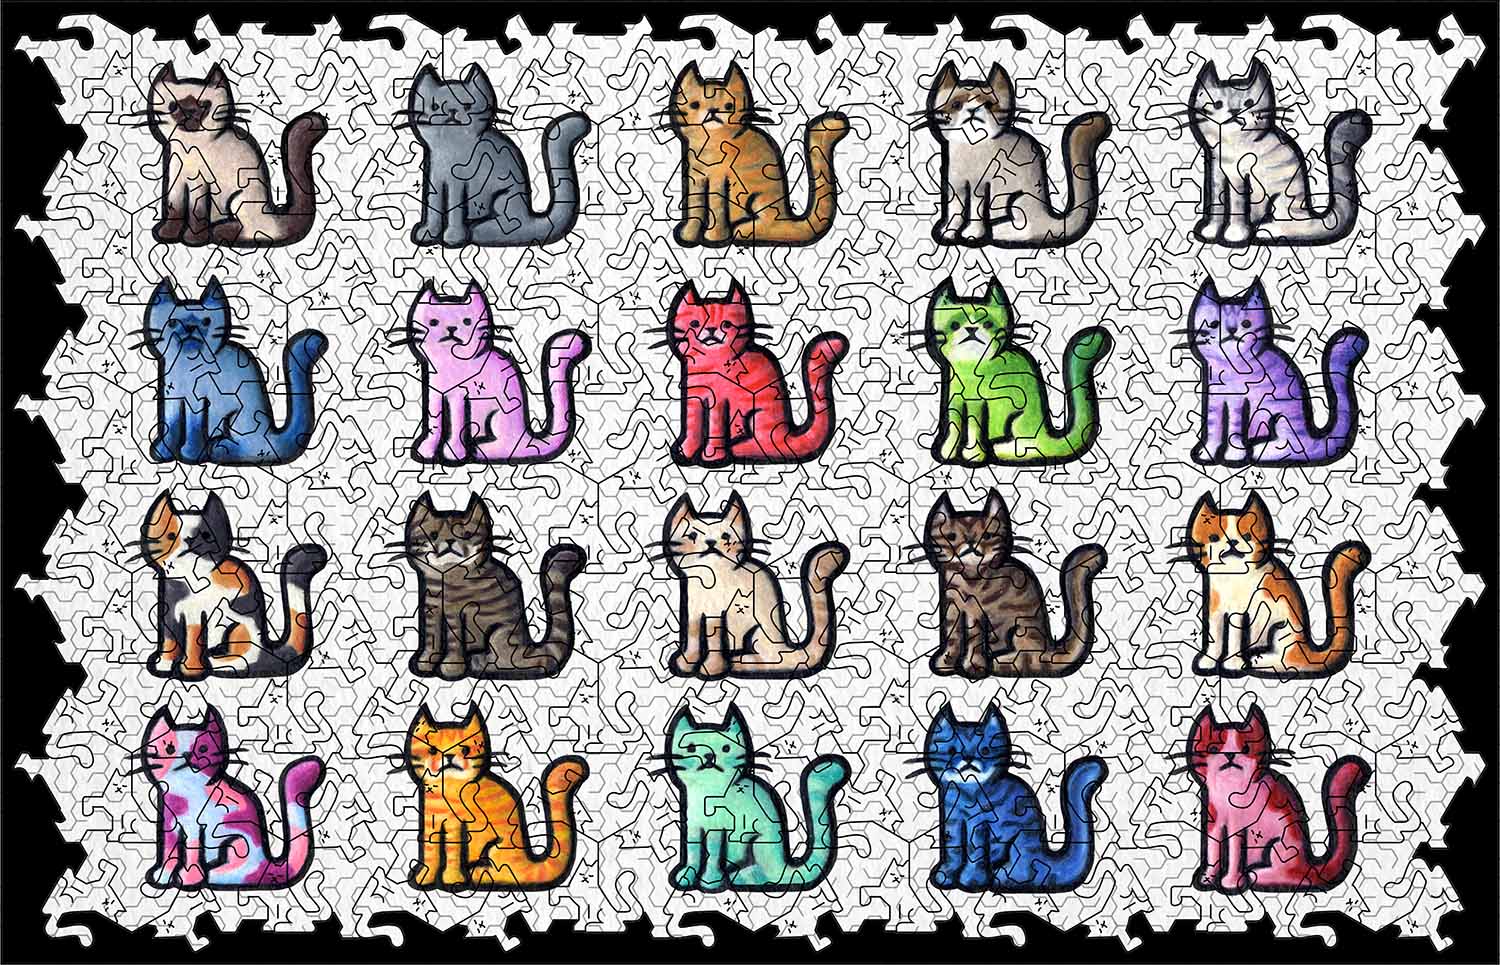 Meow Cats Jigsaw Puzzle